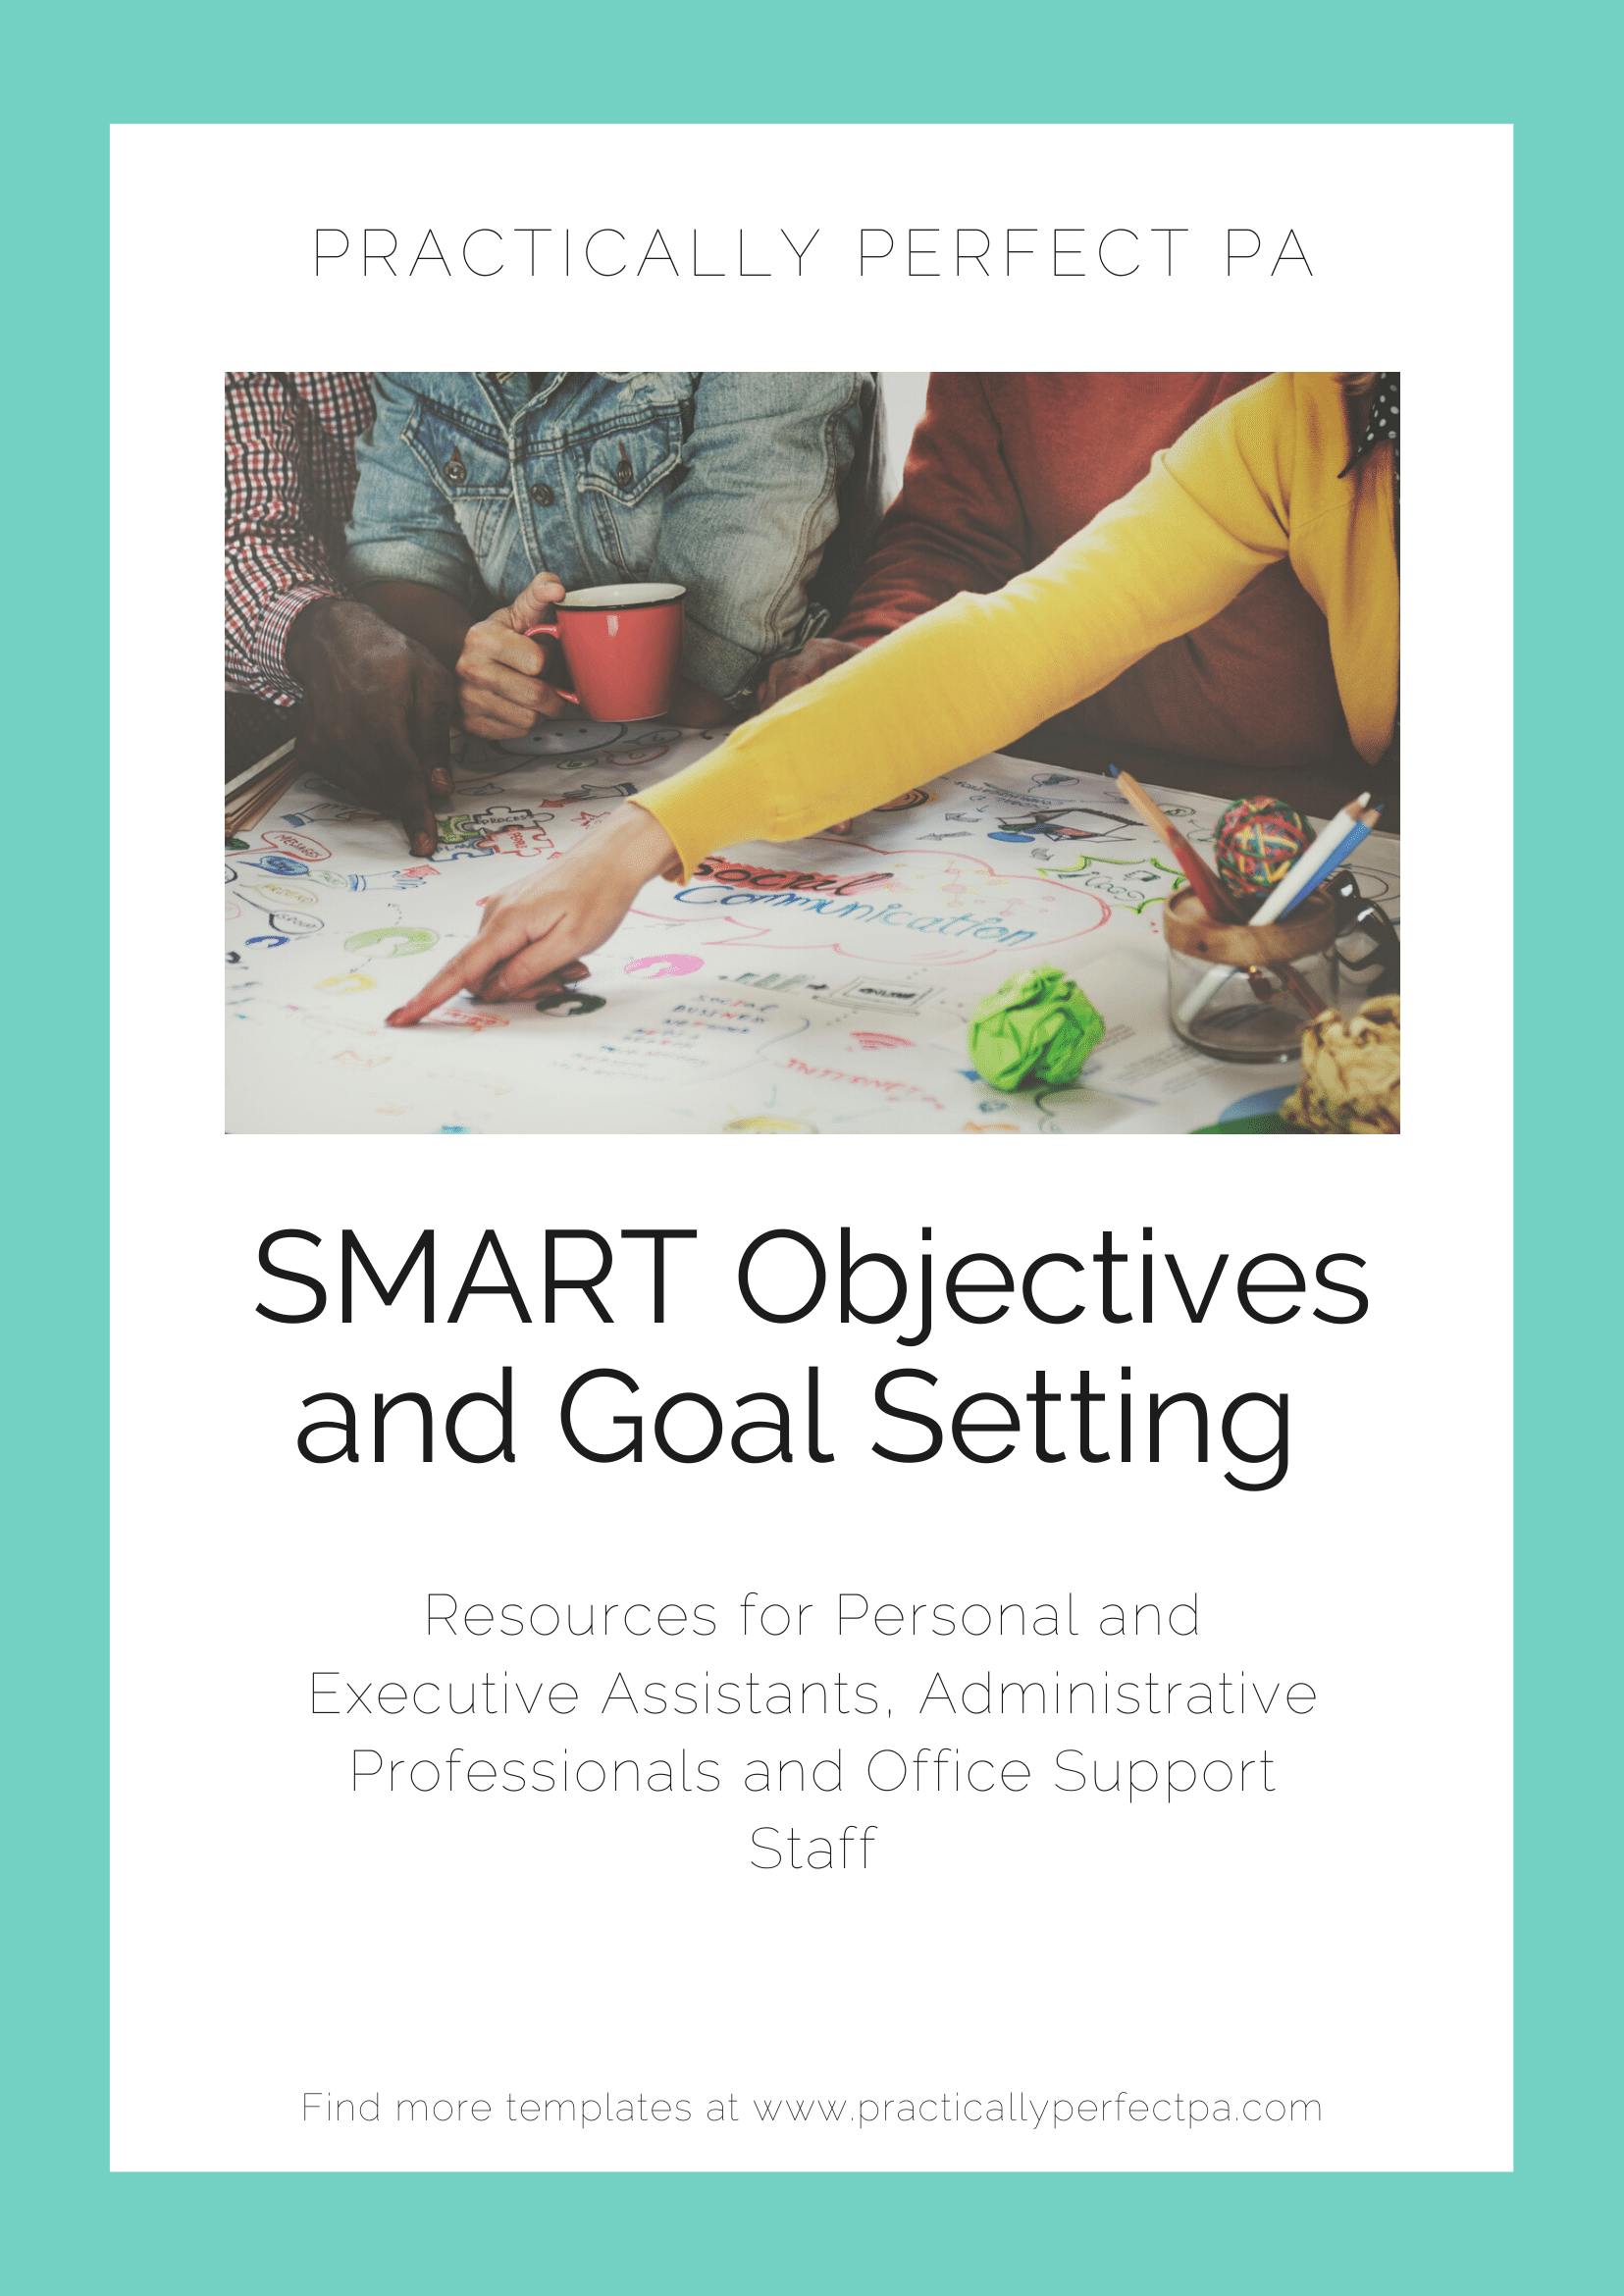 SMART objectives and Goal Setting Bundle for Executive Assistants